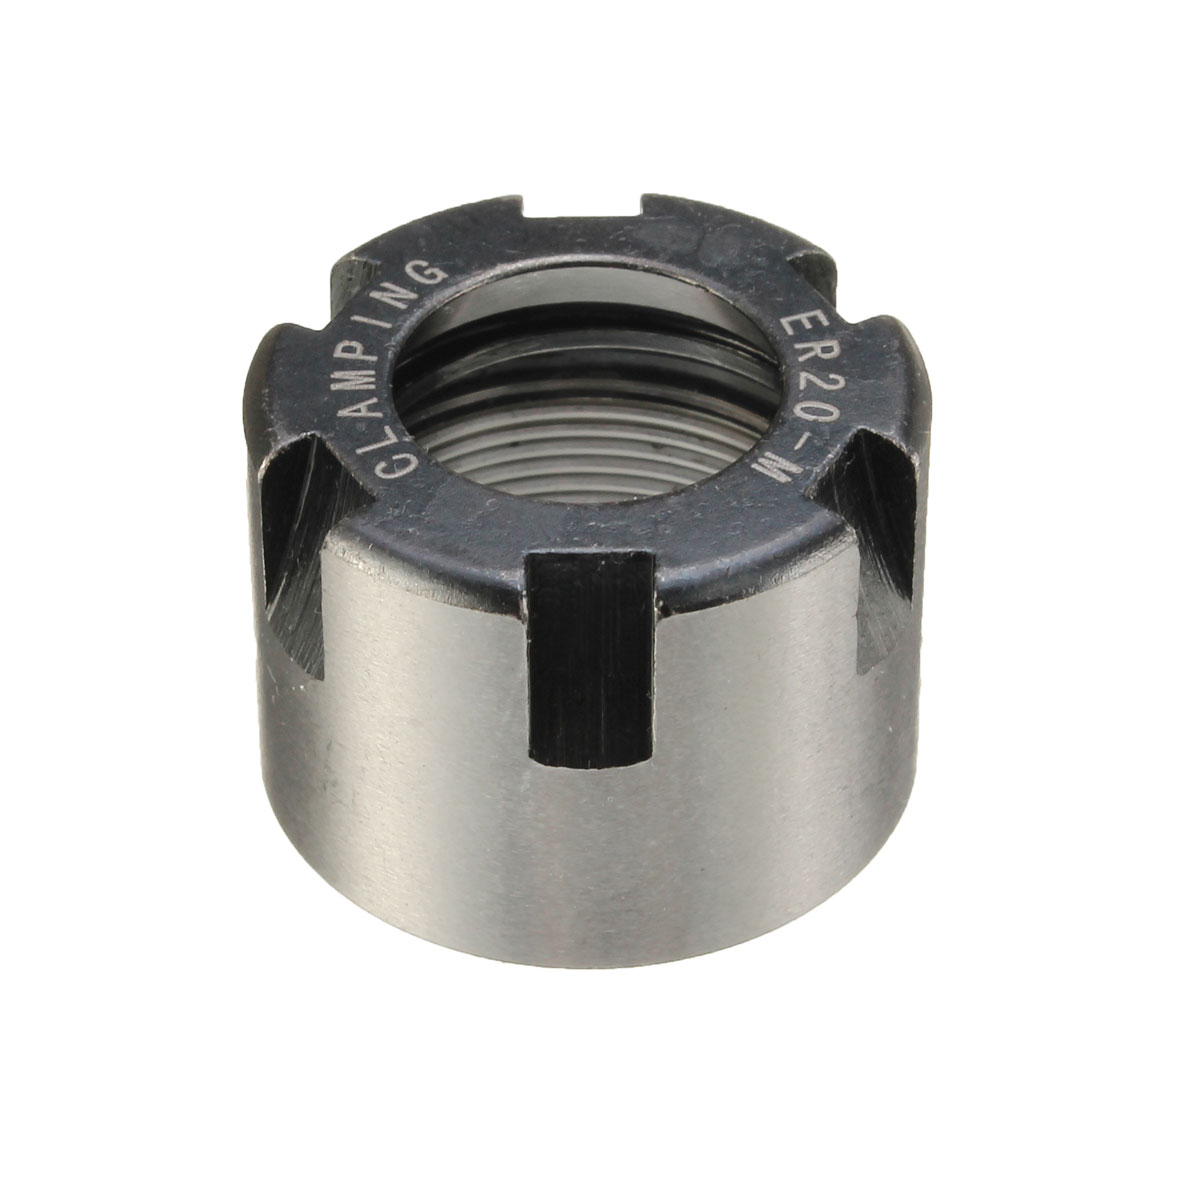 ER--A-M-Type-Nut-Collet-Clamping-Nut-for-CNC-Milling-Chuck-Holder-Lathe-Tool-1064956-3